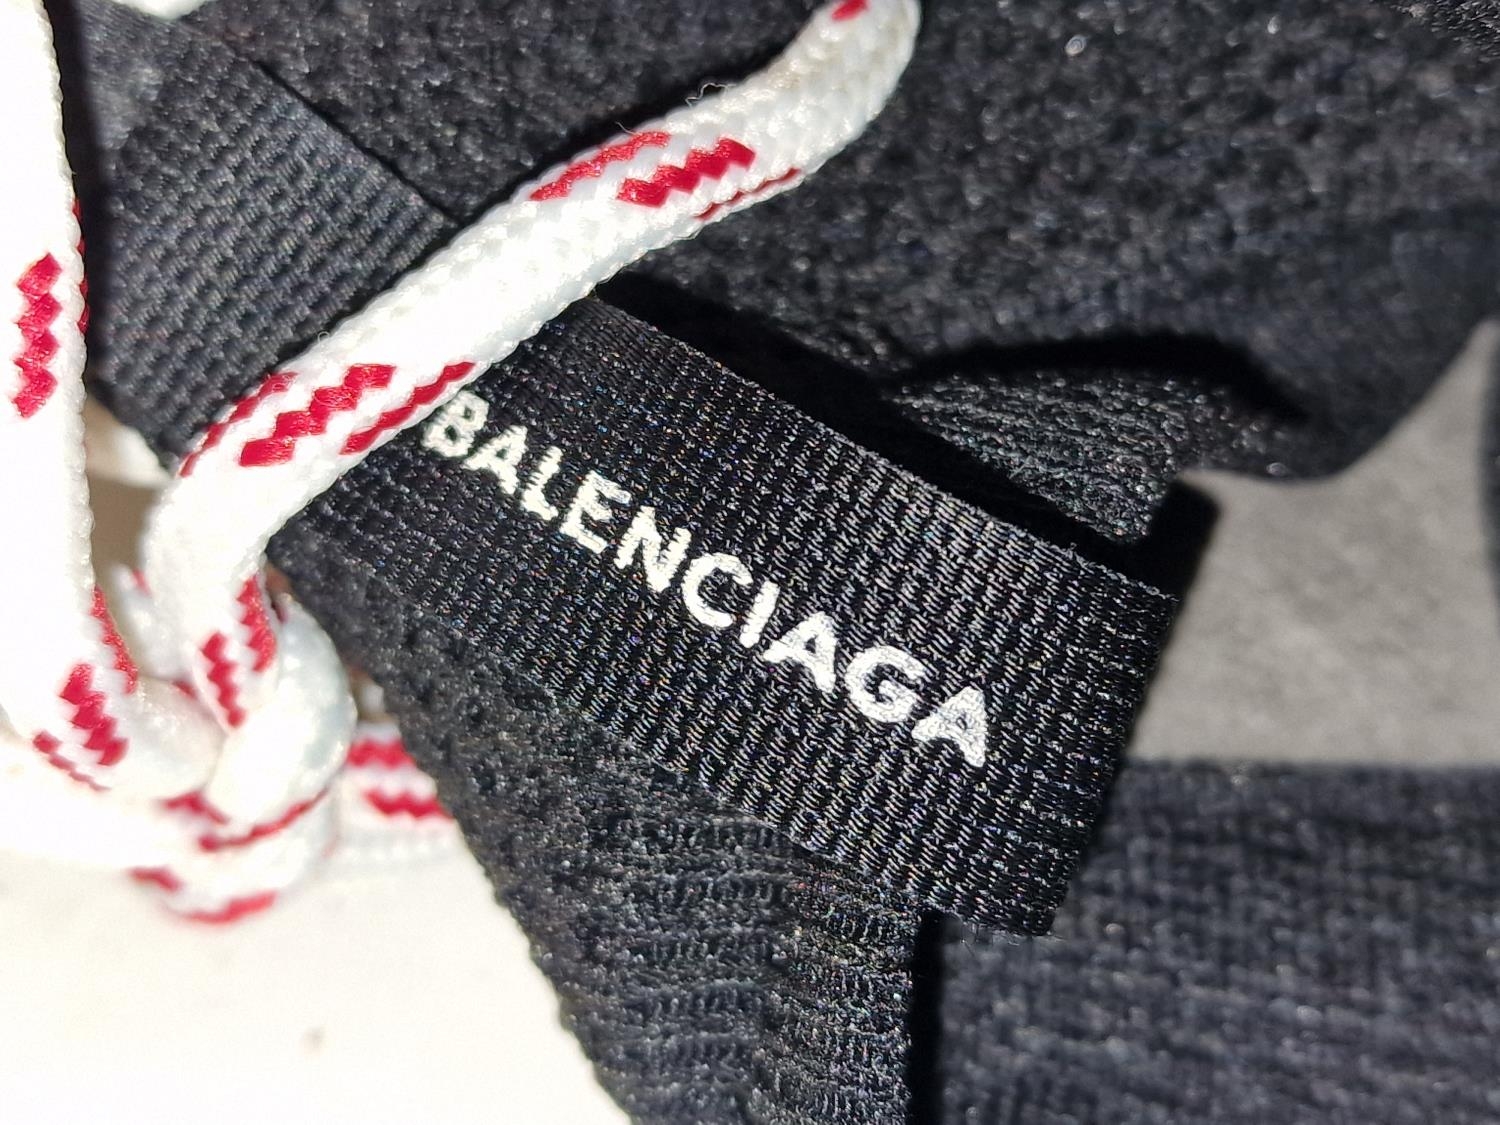 Pair of pre owned Balenciaga Noir 1000 black trainers size 9 with box and dust bag (REF 111). - Image 3 of 4